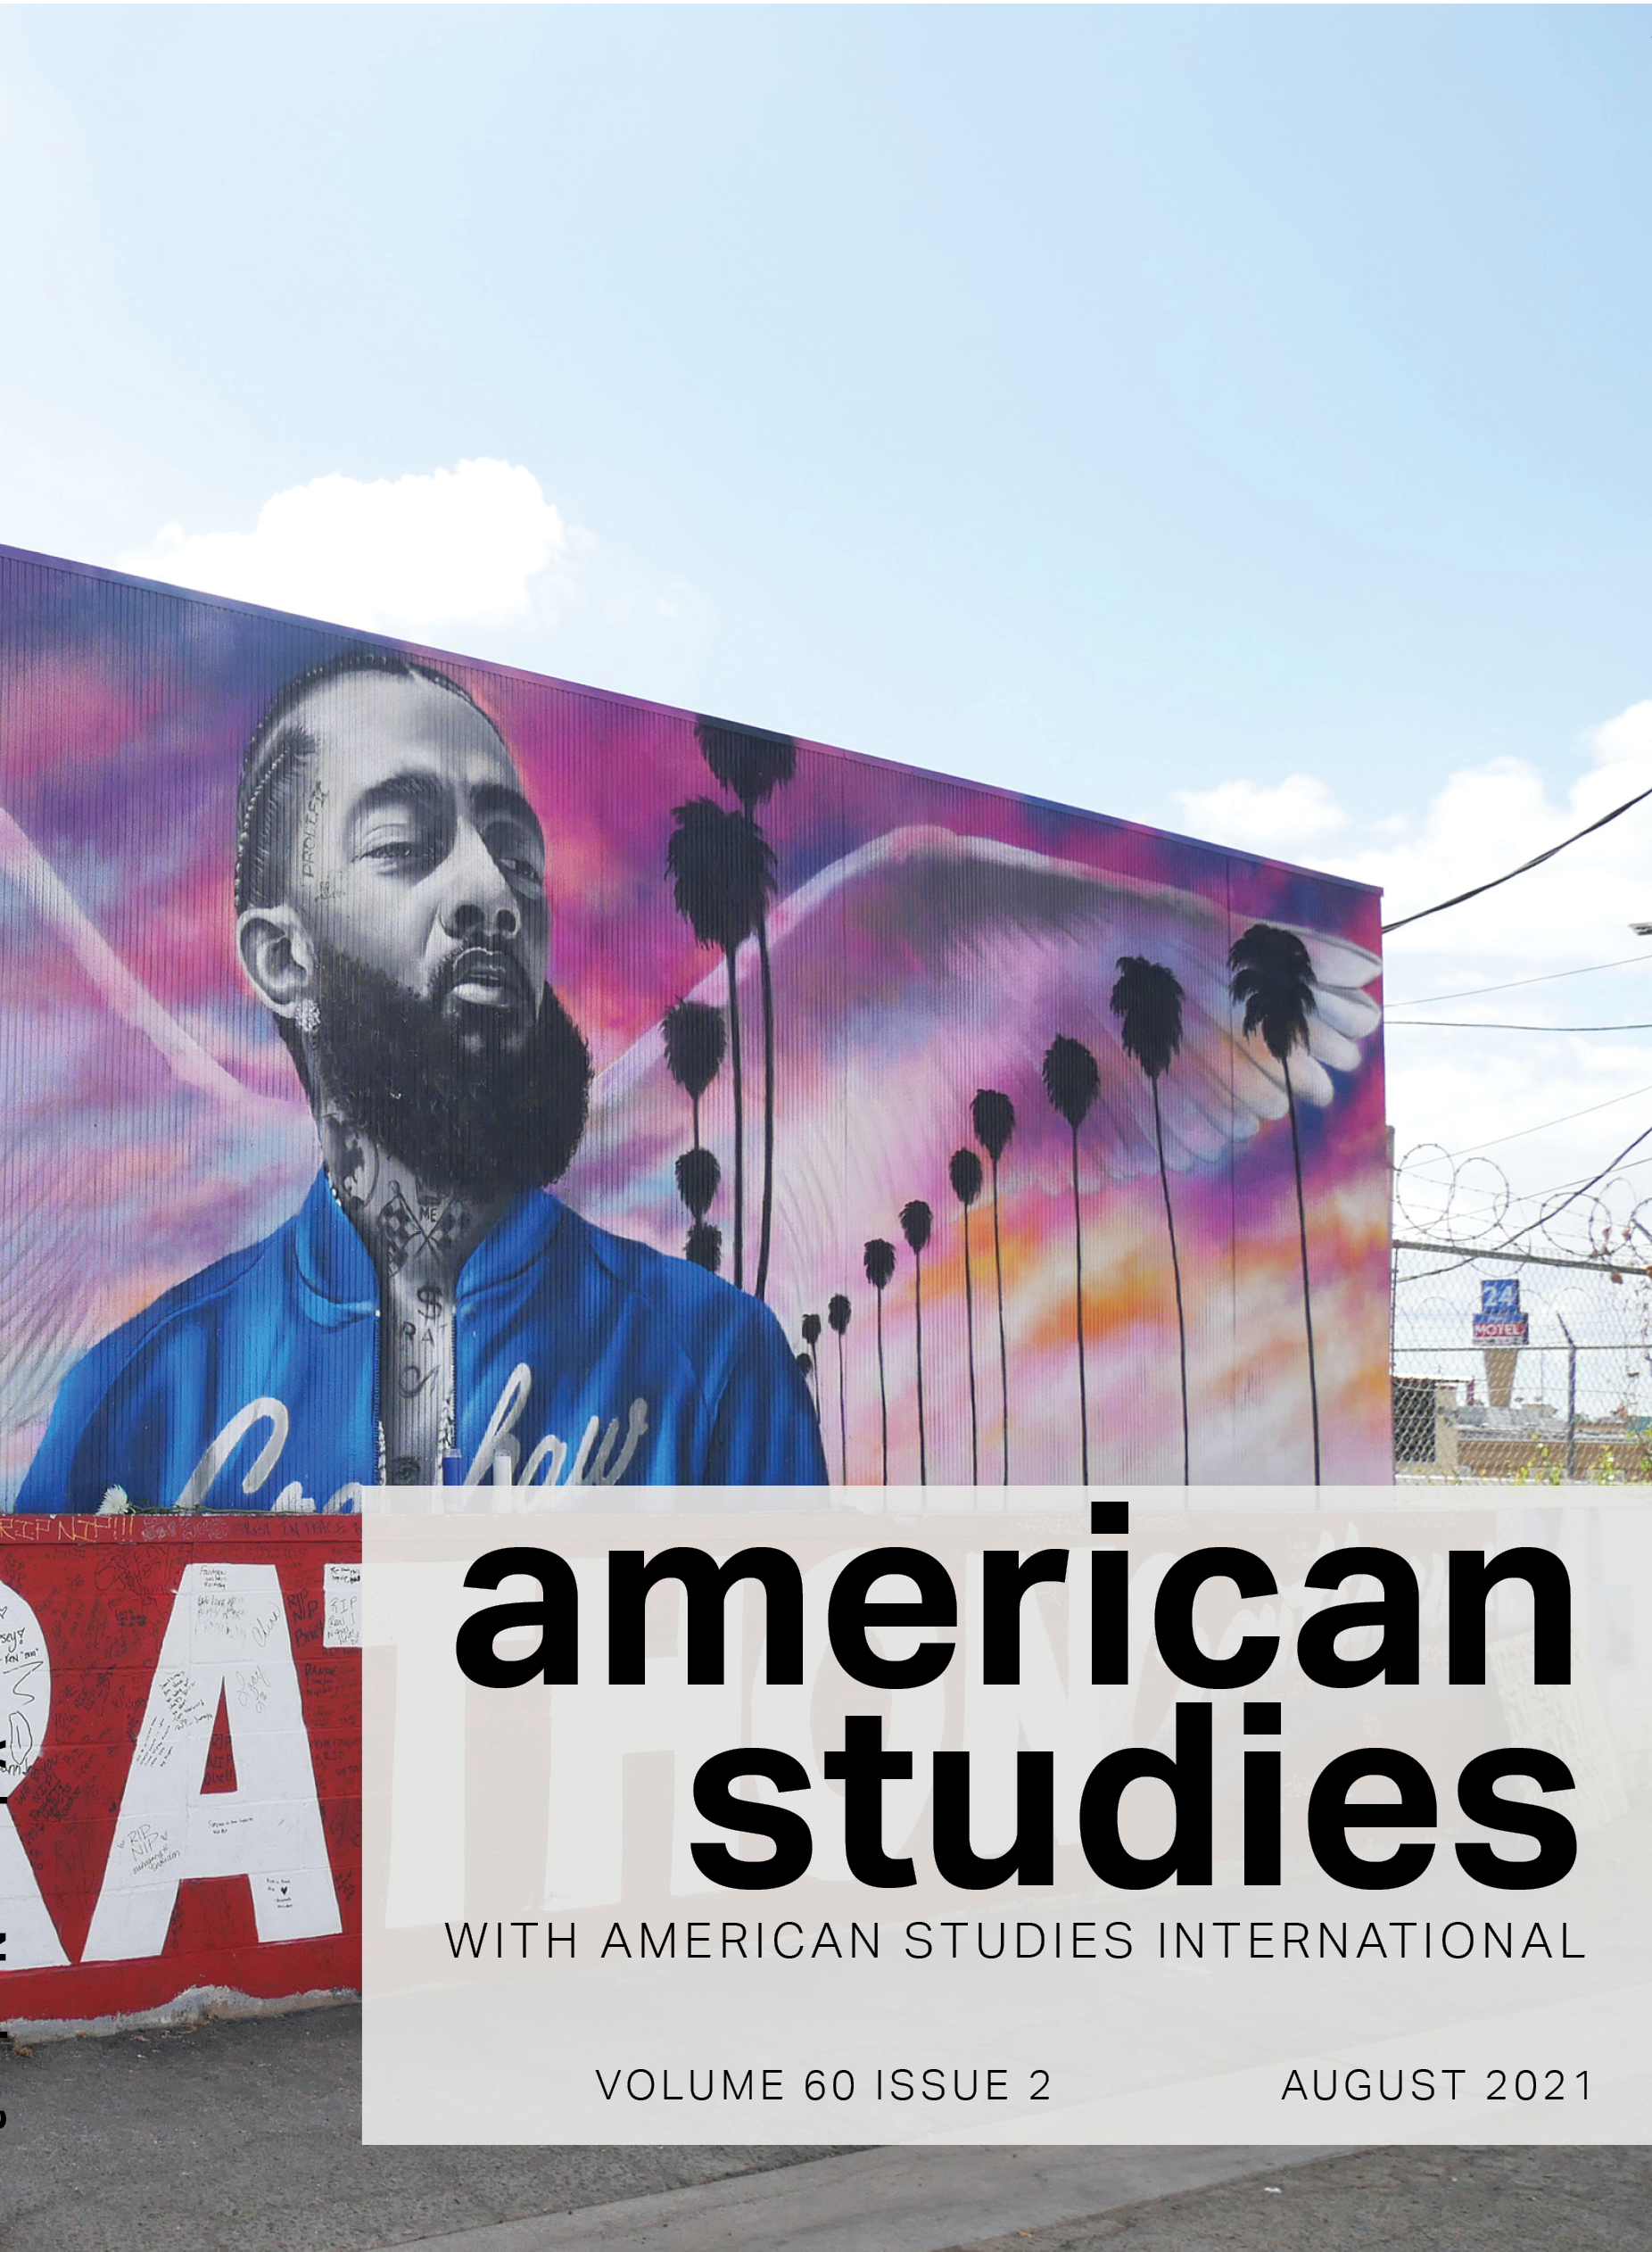 A colorful mural of the rapper Nipsey Hussle.